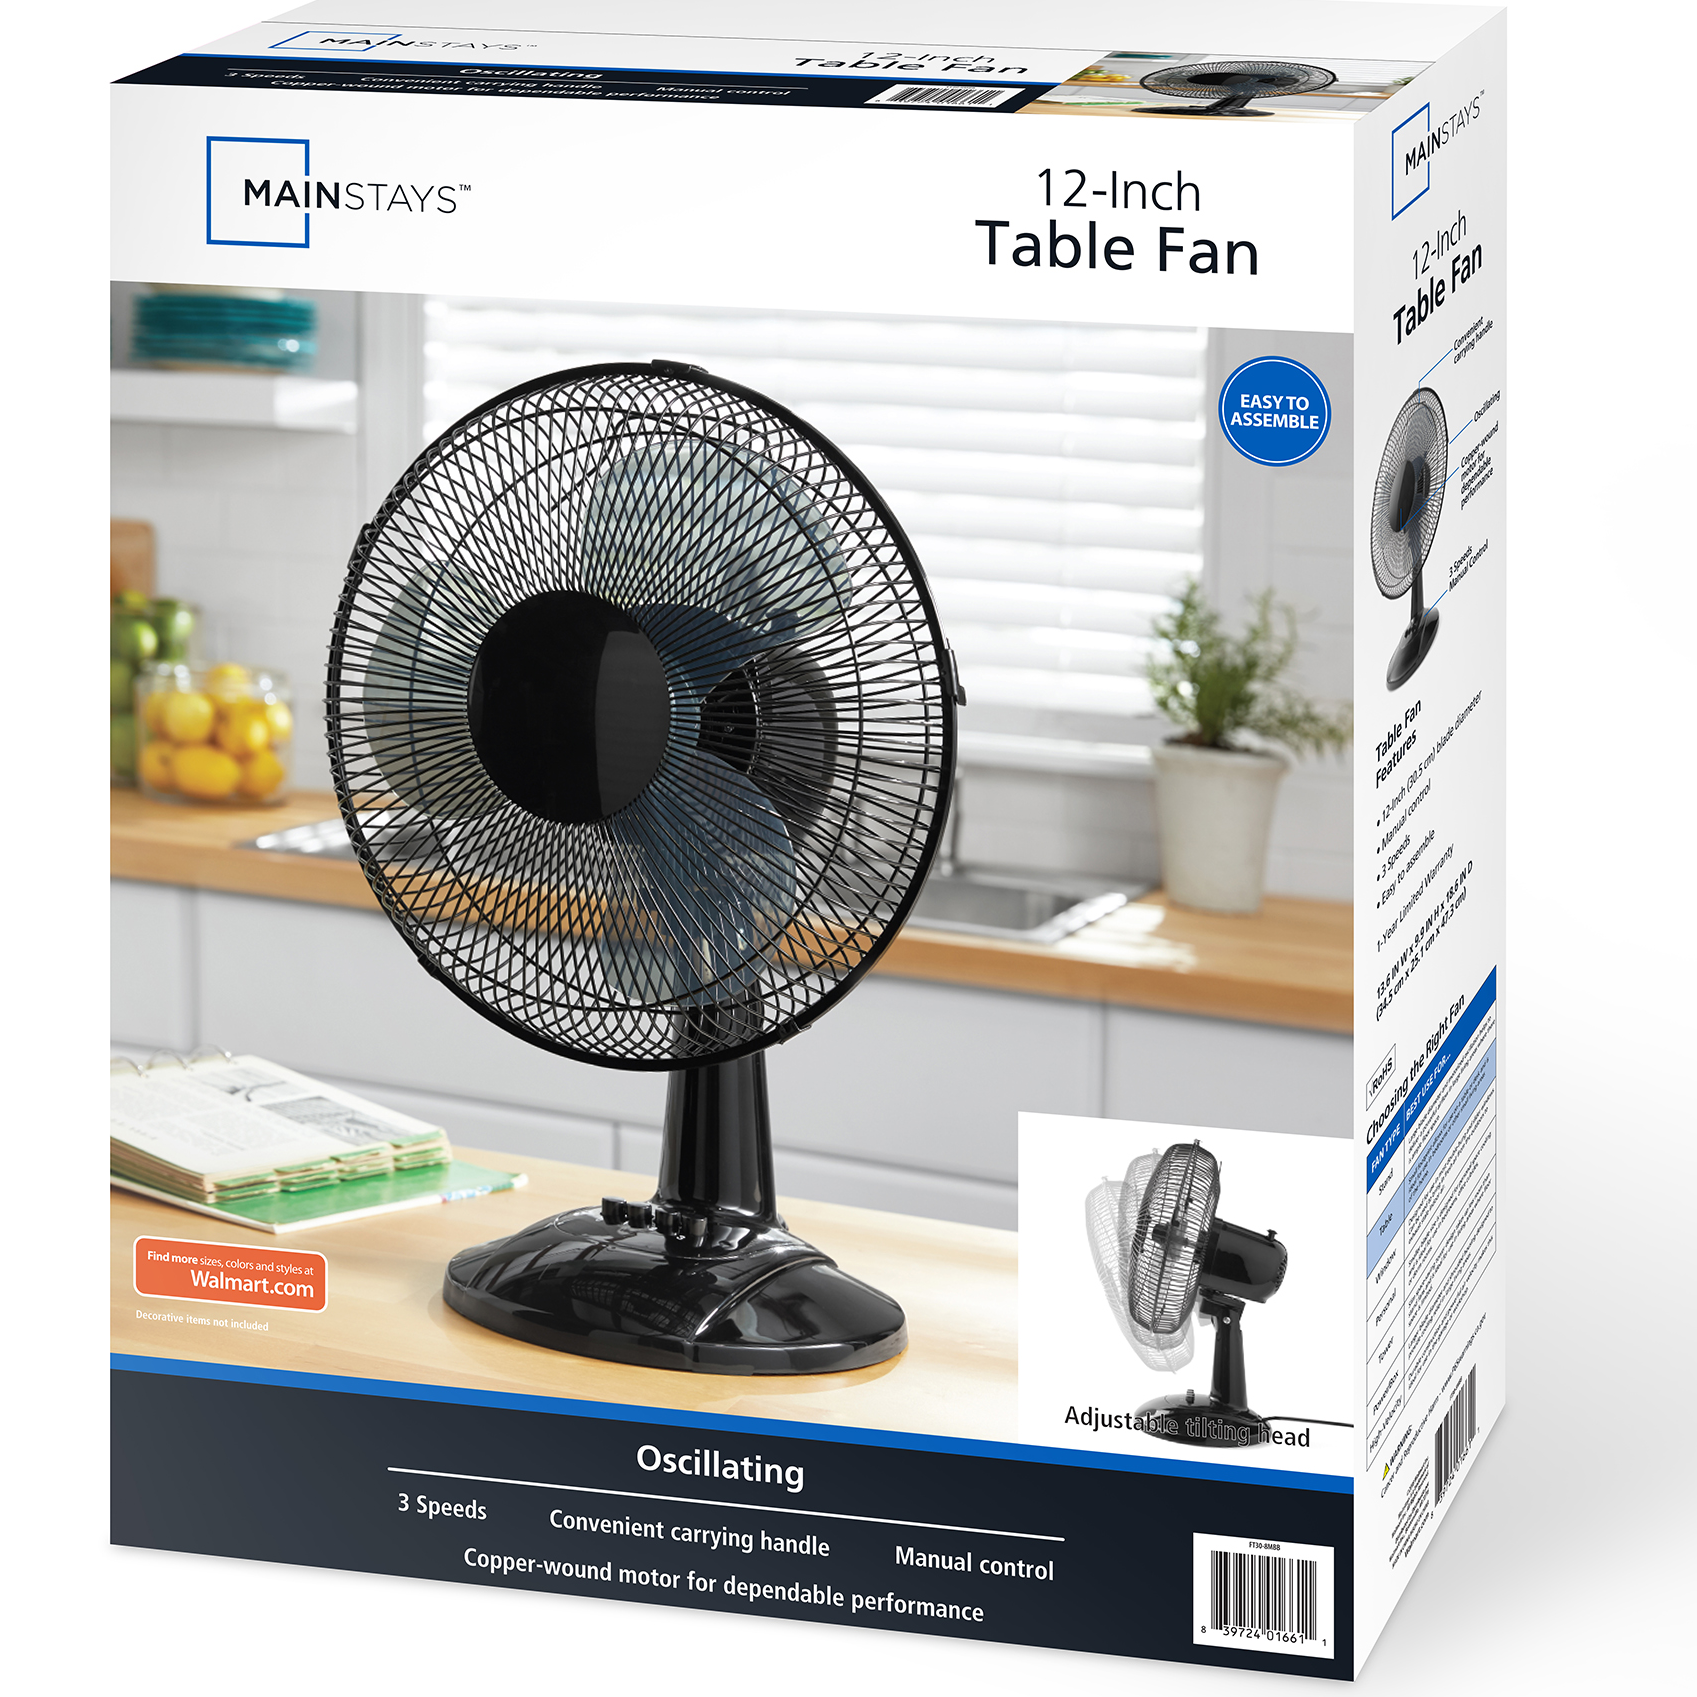 Mainstays 12" 3-Speed Oscillating Table Fan, FT30-8MBB, New, Black - image 2 of 9